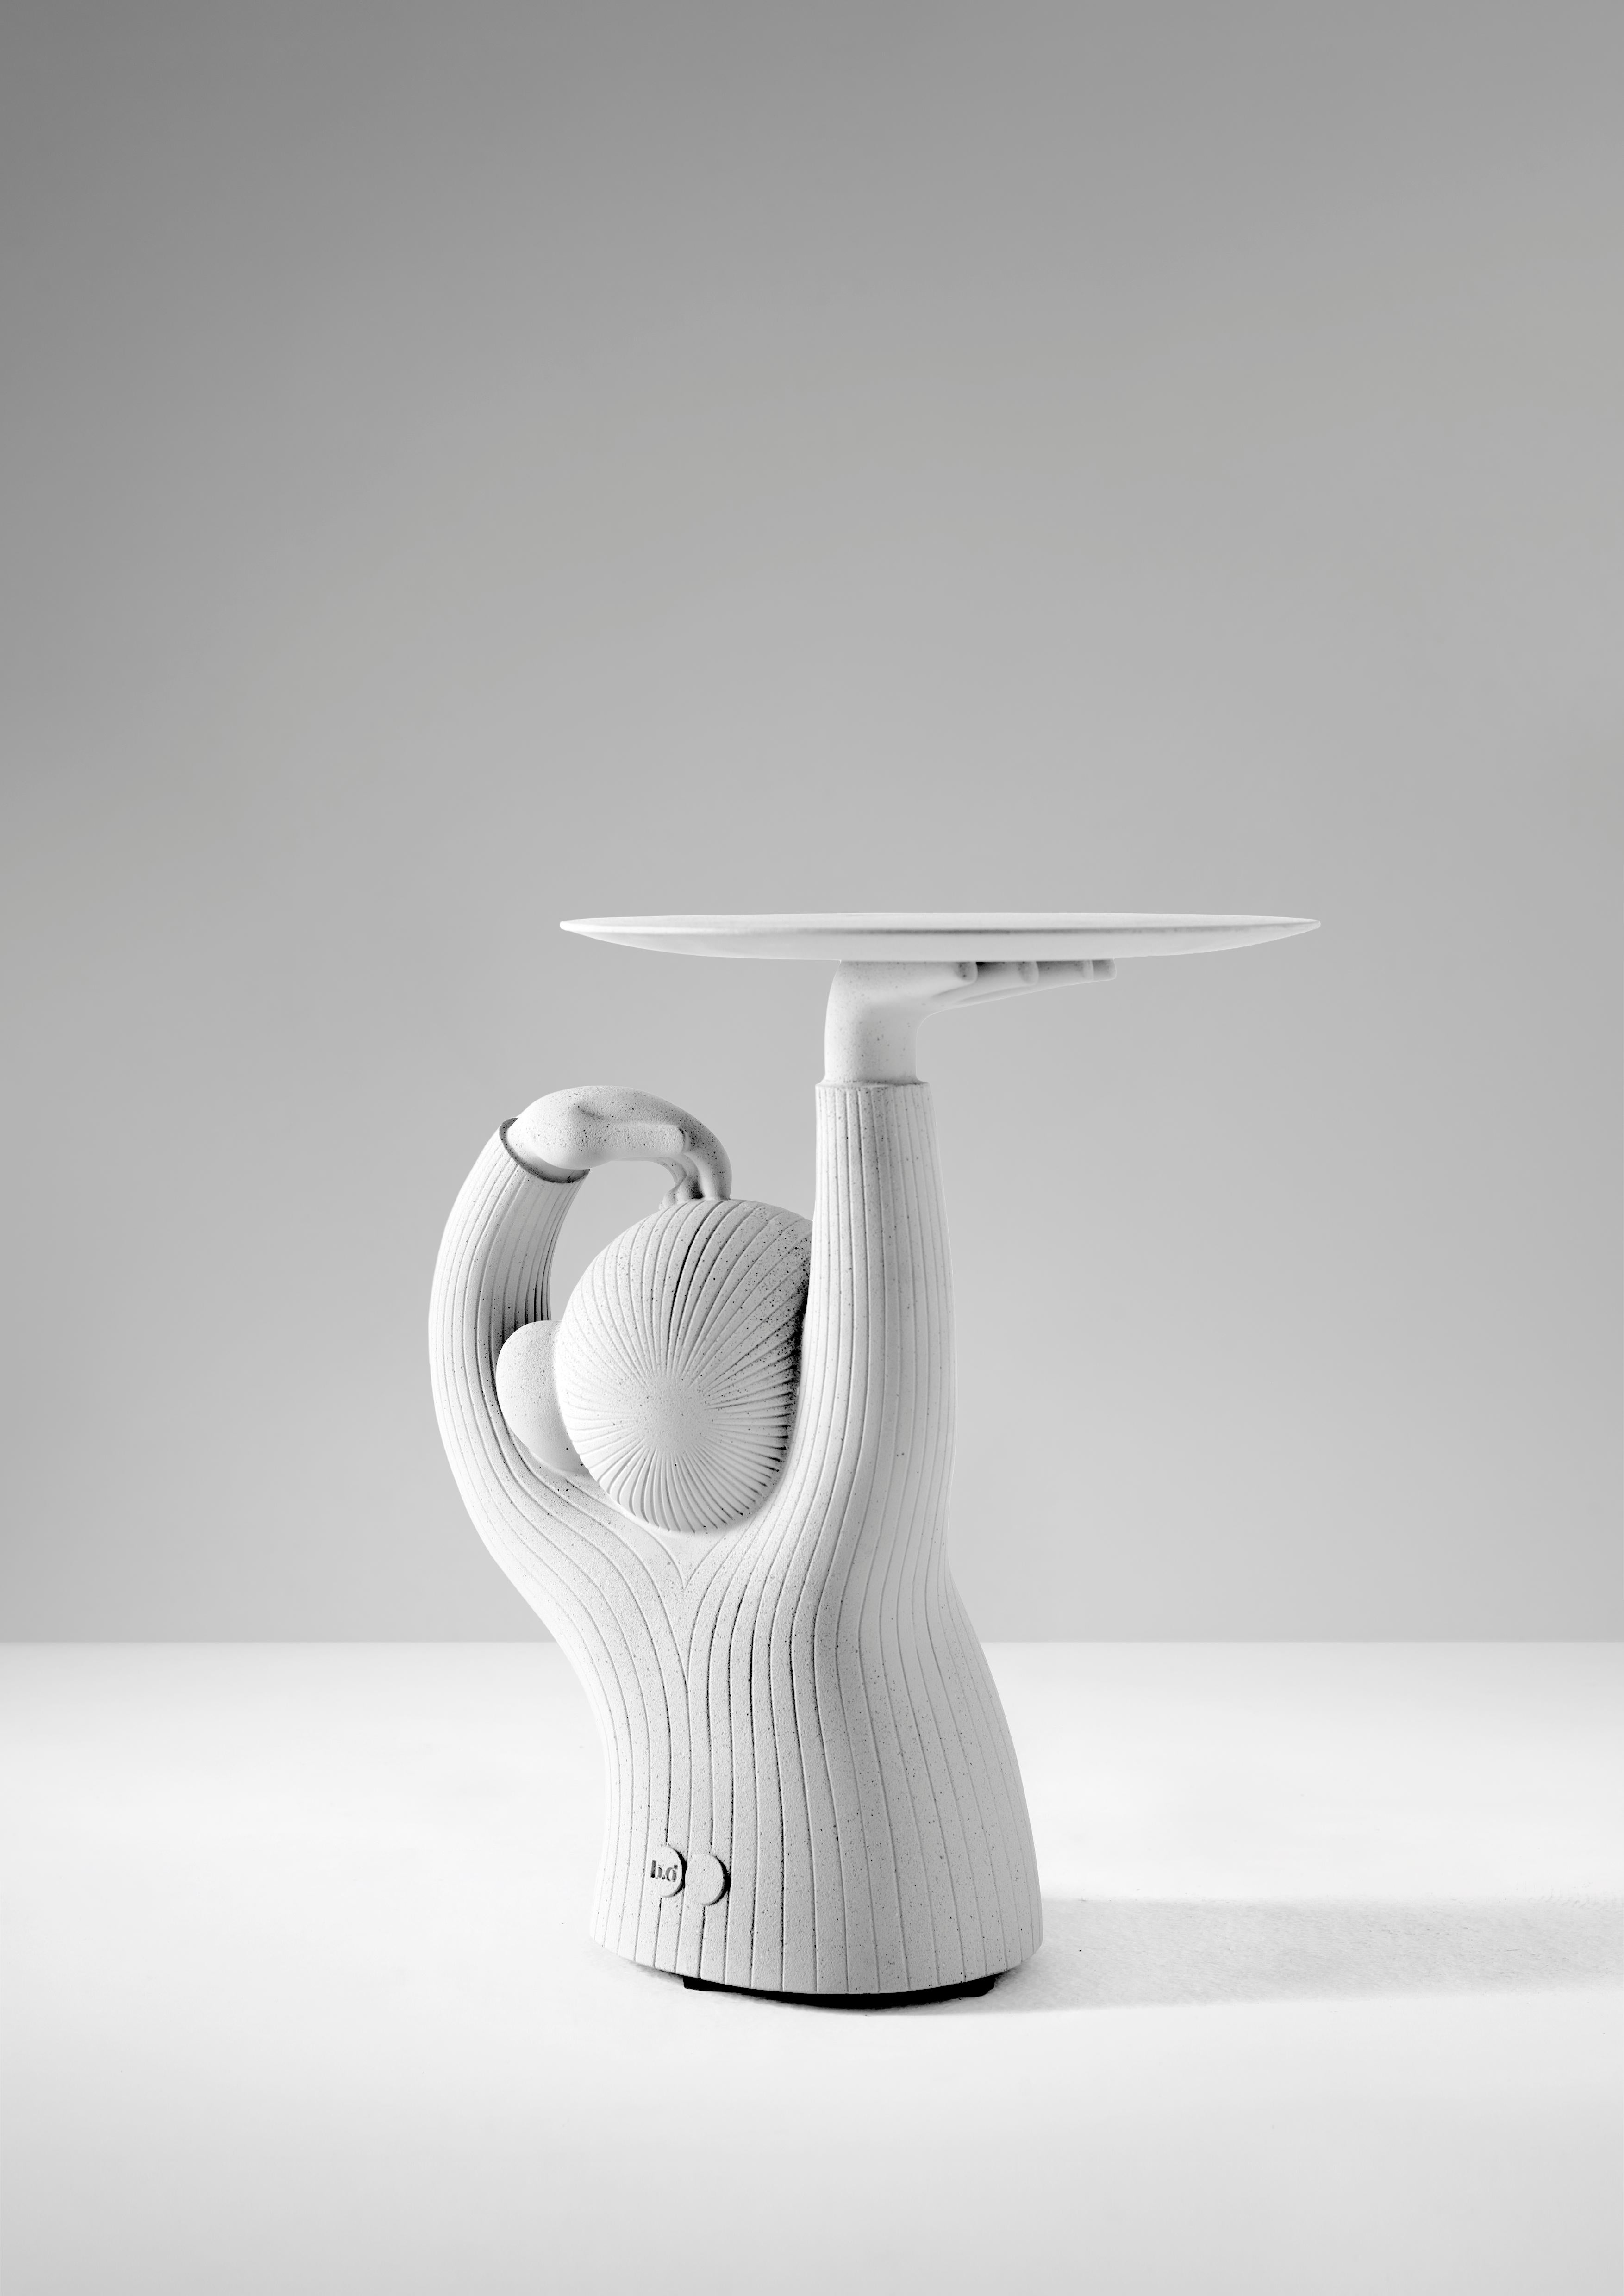 Side table made of solid architectural concrete in white. Apt for indoor and outdoor use. Regulatory glides included.
Few pieces have achieved bestseller success and simultaneous publishing as this singular side table by Jaime Hayon. It is